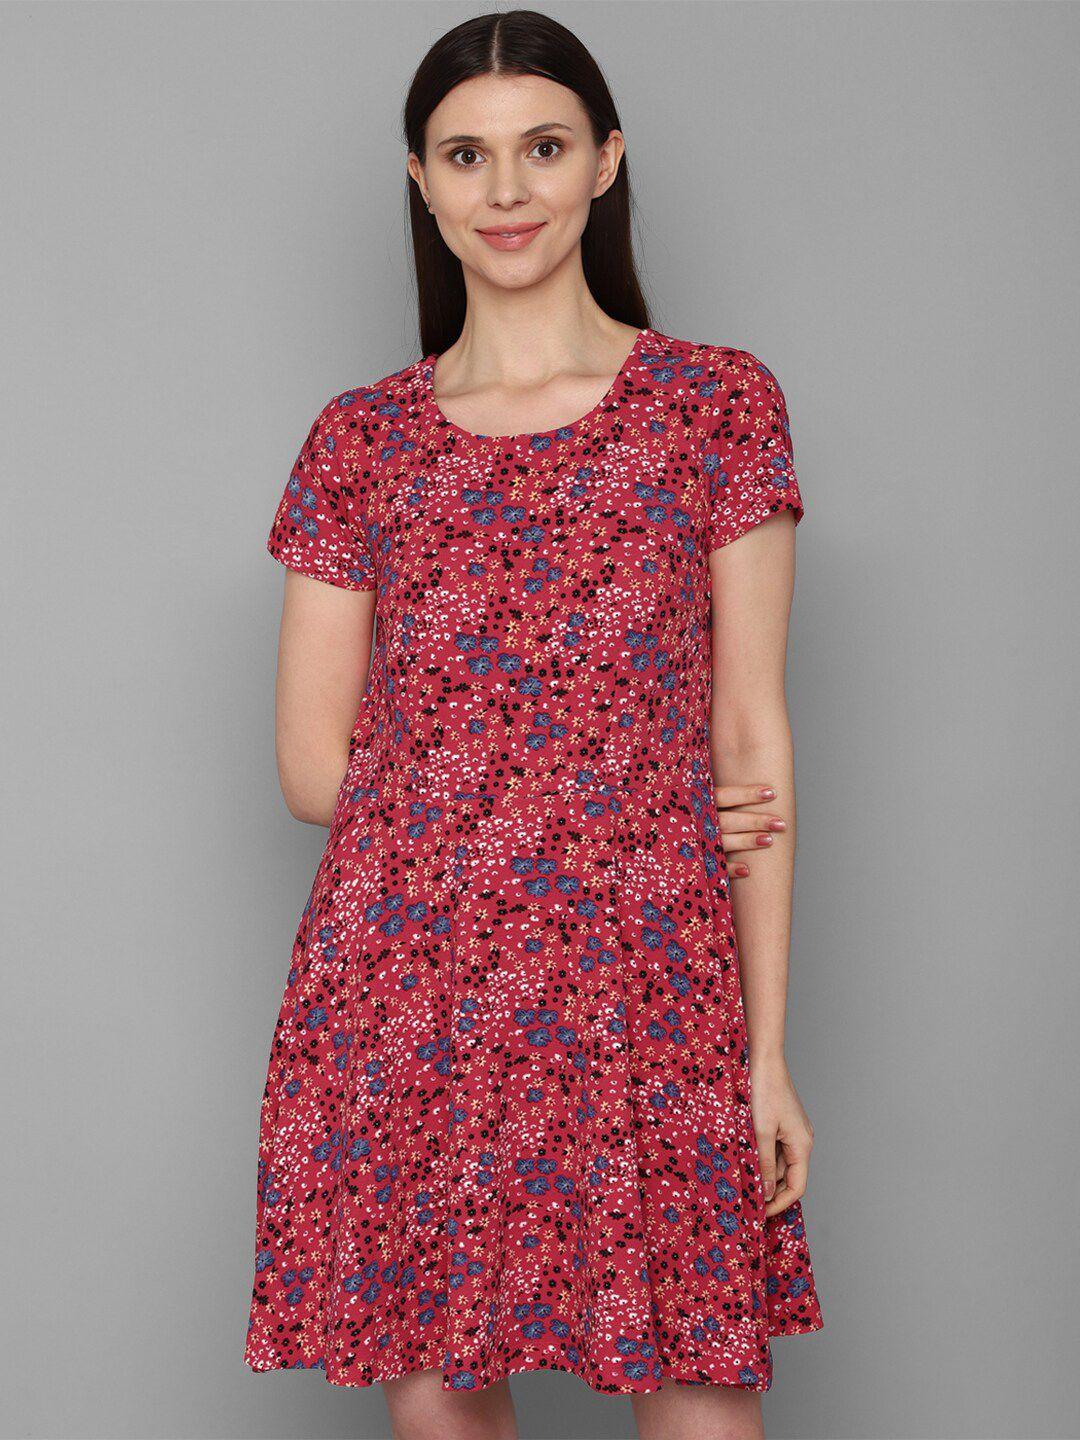 allen-solly-woman-pink-floral-a-line-dress